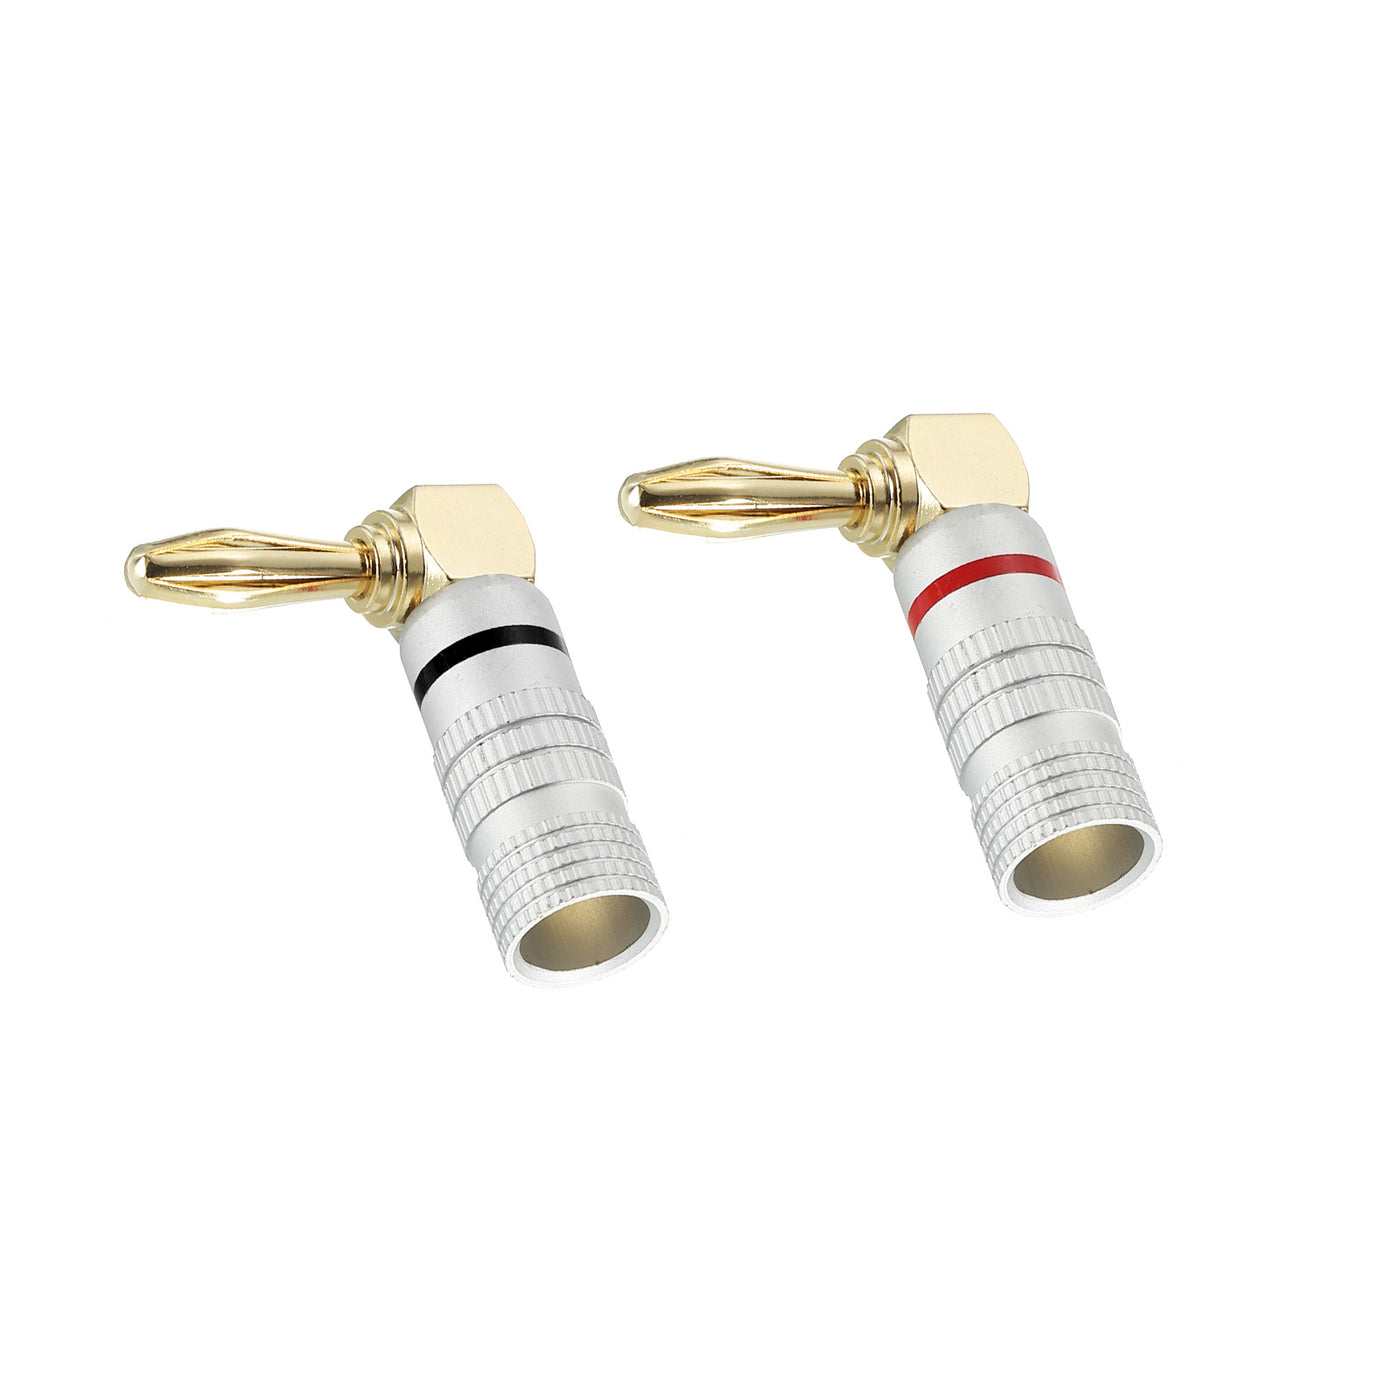 Harfington Banana Plugs 90 Degree Speaker Banana Plugs Closed Screw Type 4mm Gold-Plated Copper Red Black for Speaker Wires, Sound Systems Pack of 2